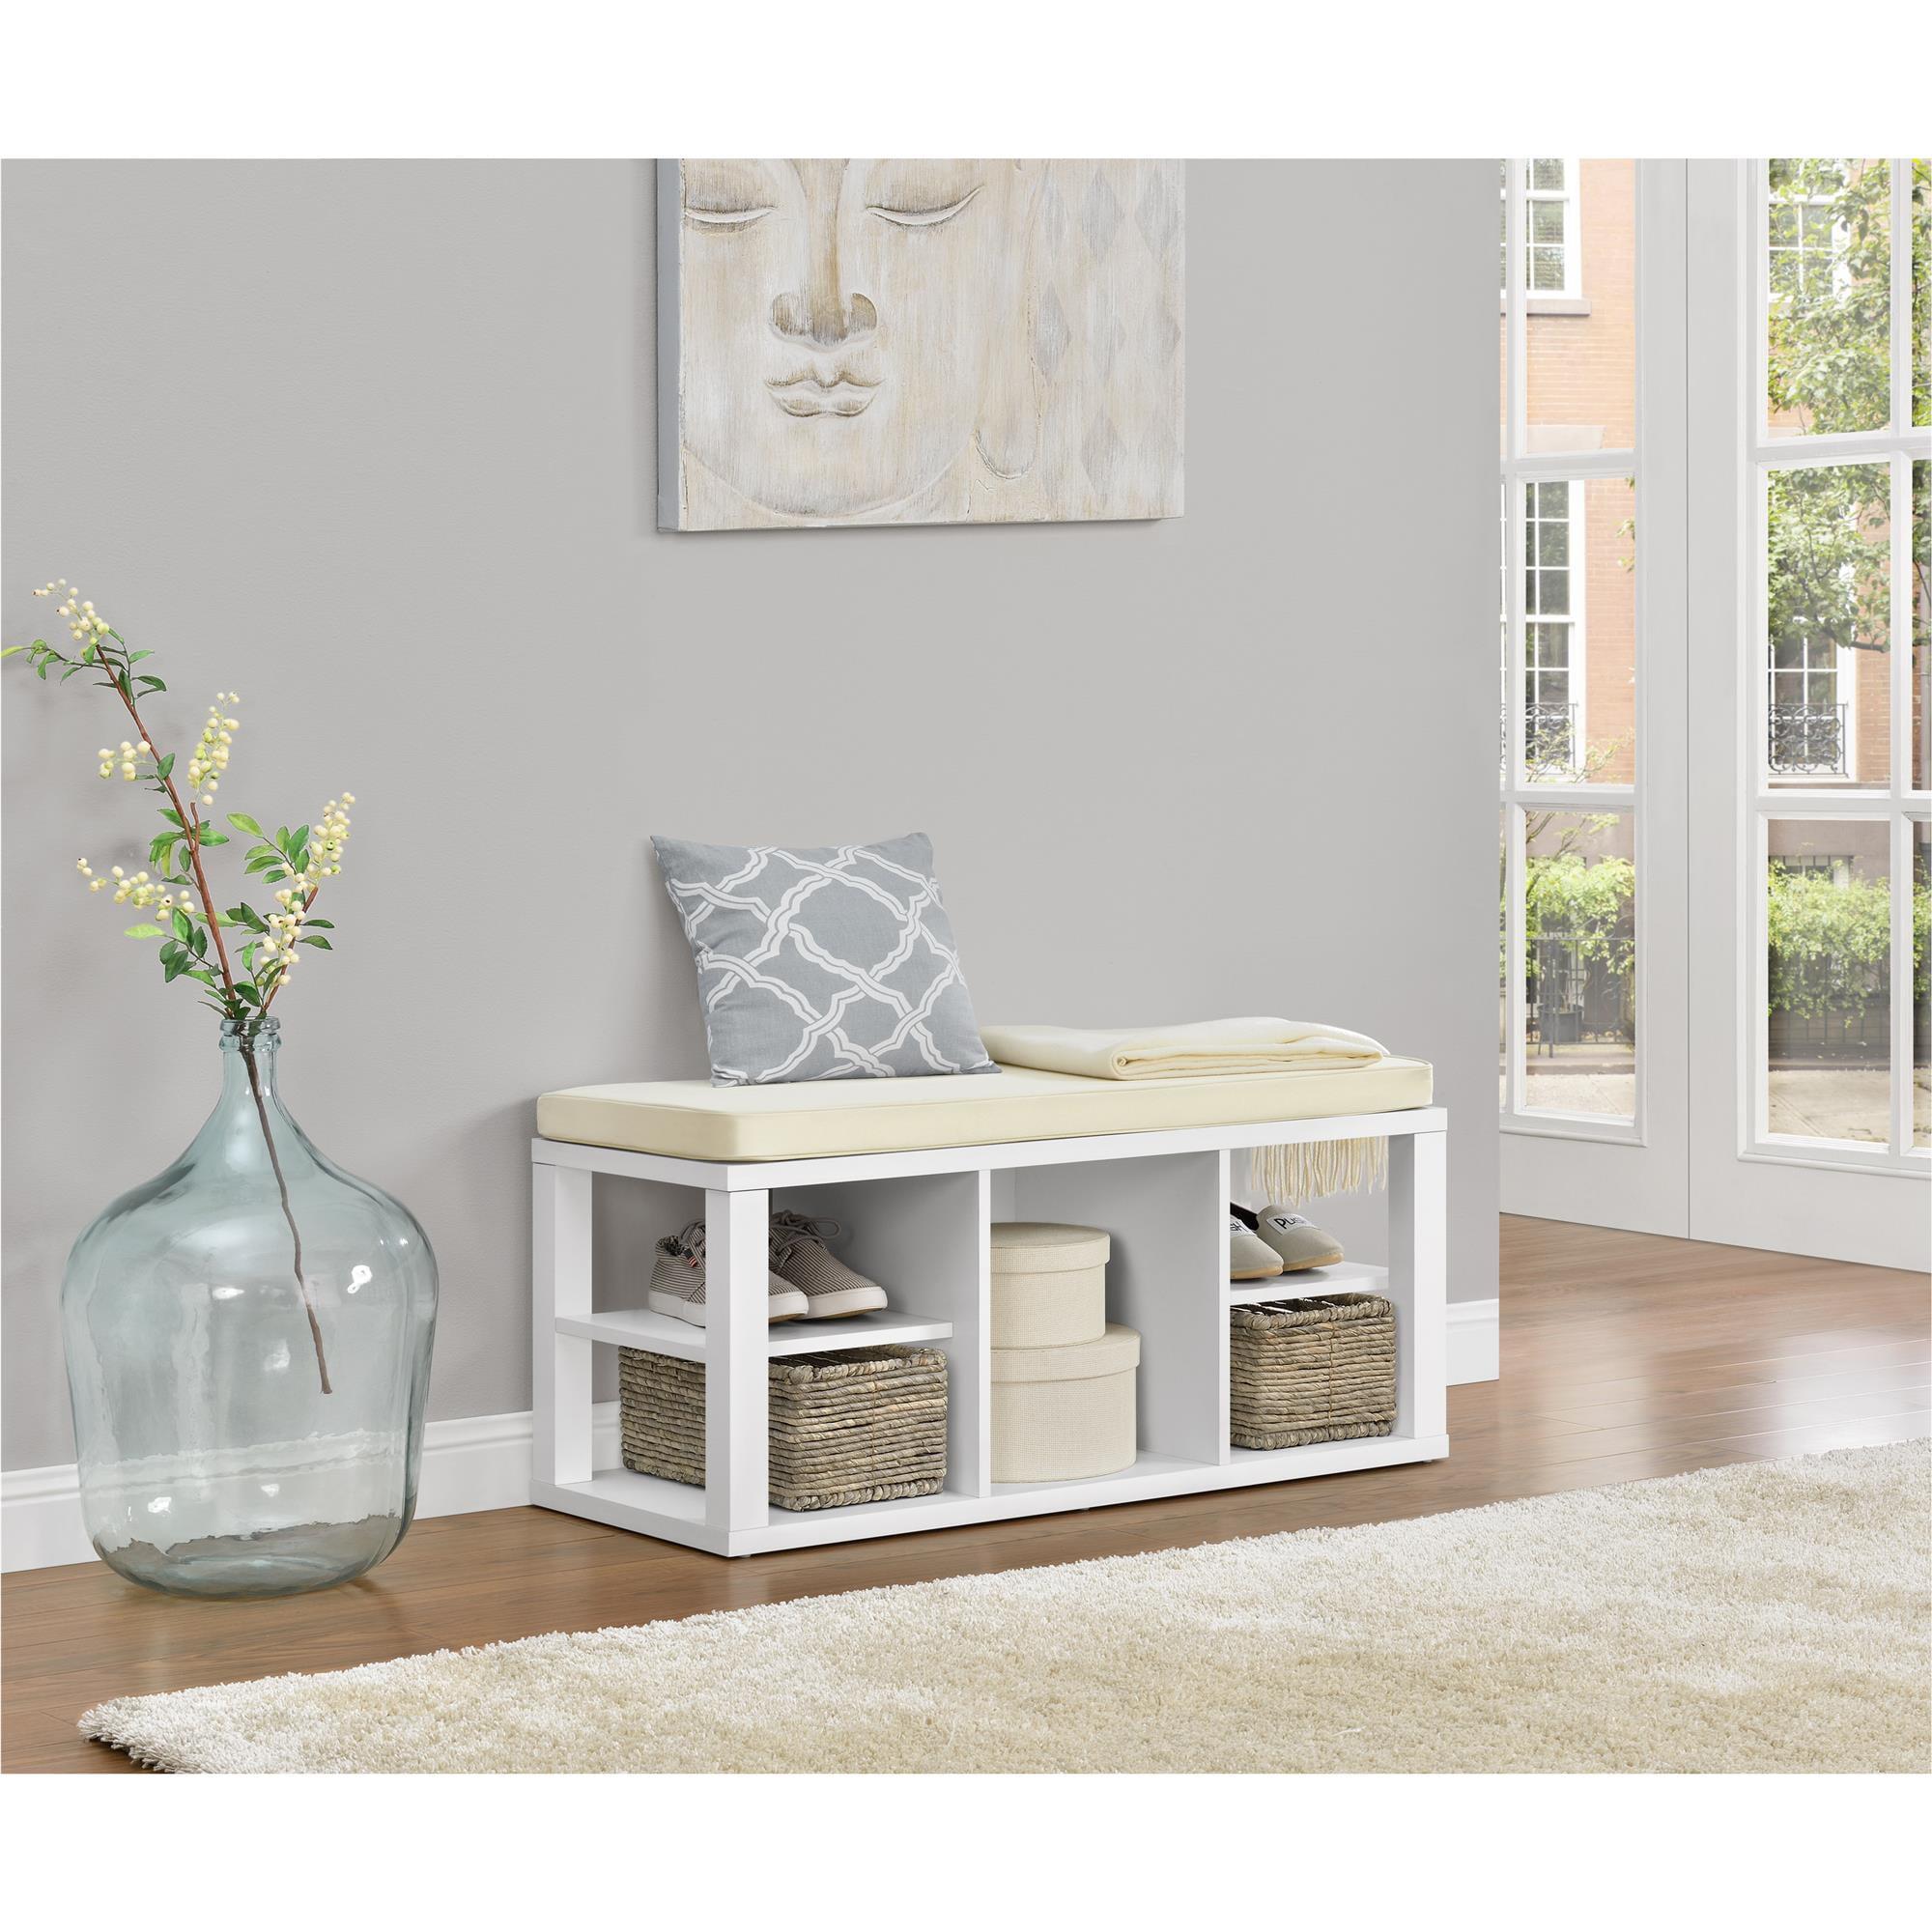 Parsons White Particleboard Storage Bench with Cushion and Open Shelves